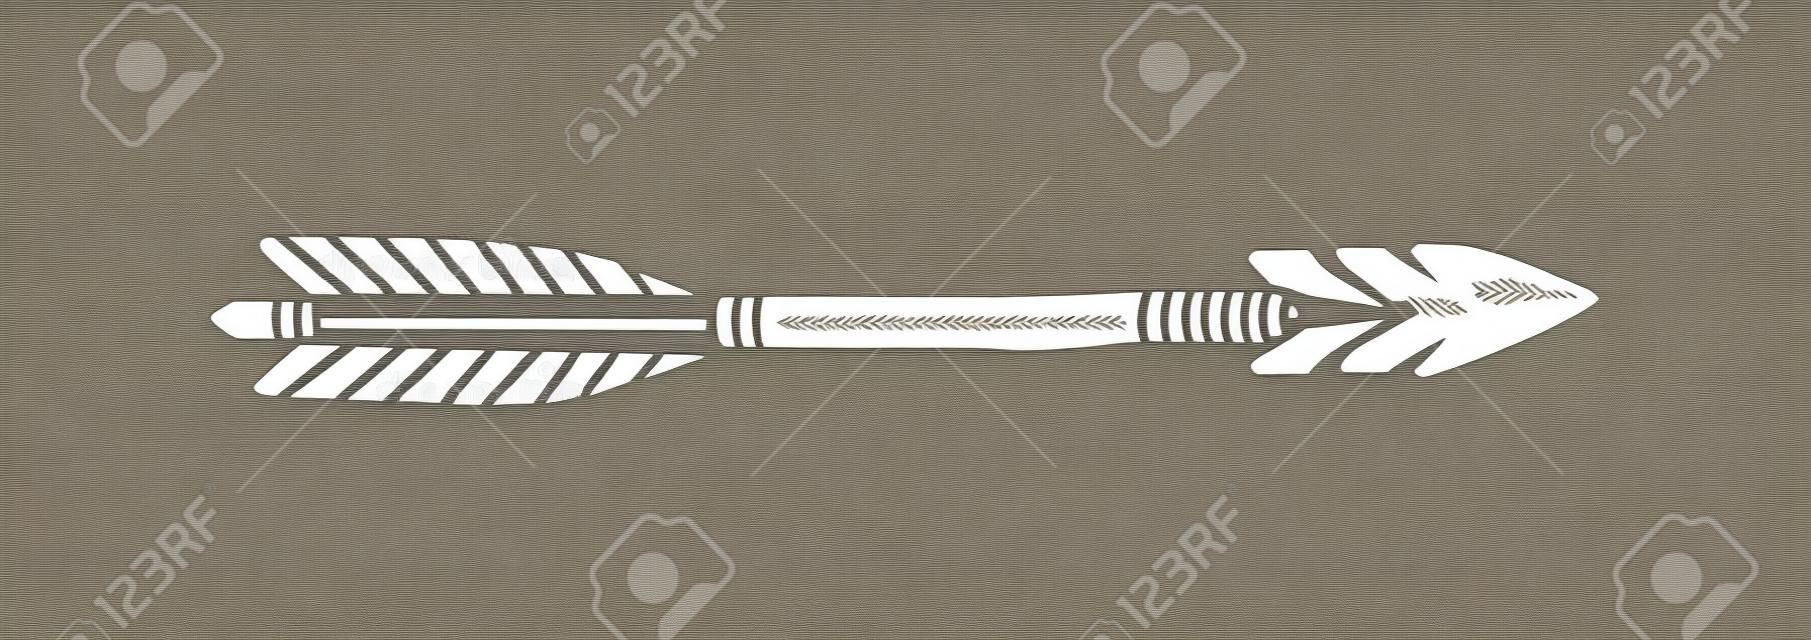 Hand Draw silhouette Ethnic Indian Arrow. Vector Illustration of Tribal Arrows Isolated on White Background with Grunge Texture.